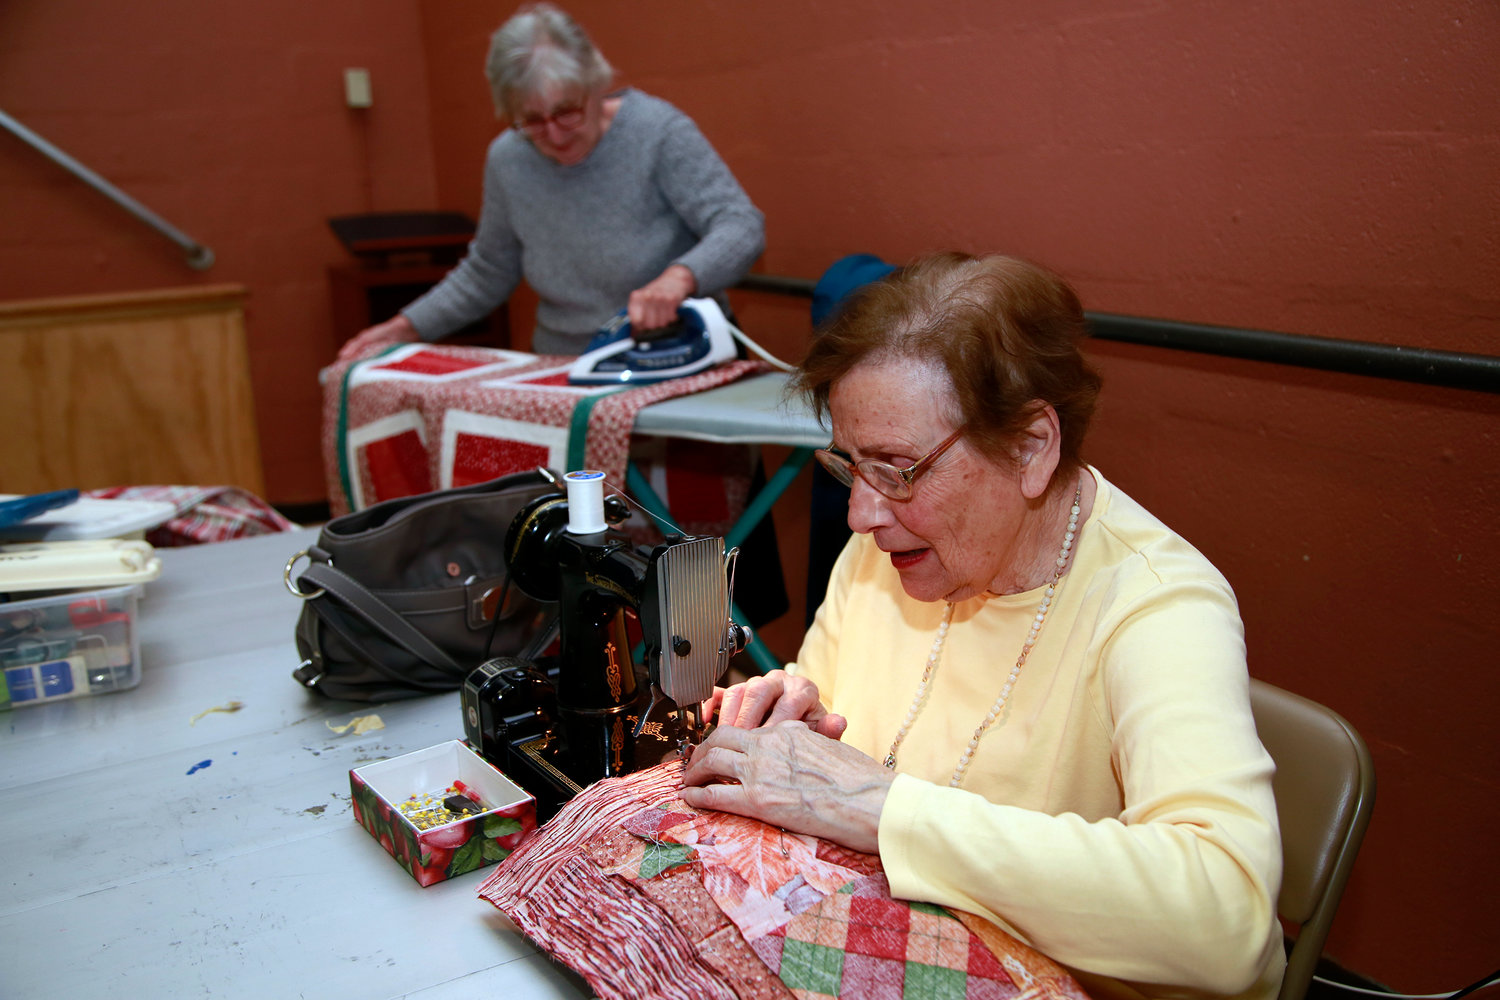 Ellen Paplia sewed quilts while Paula Mazzola ironed them.